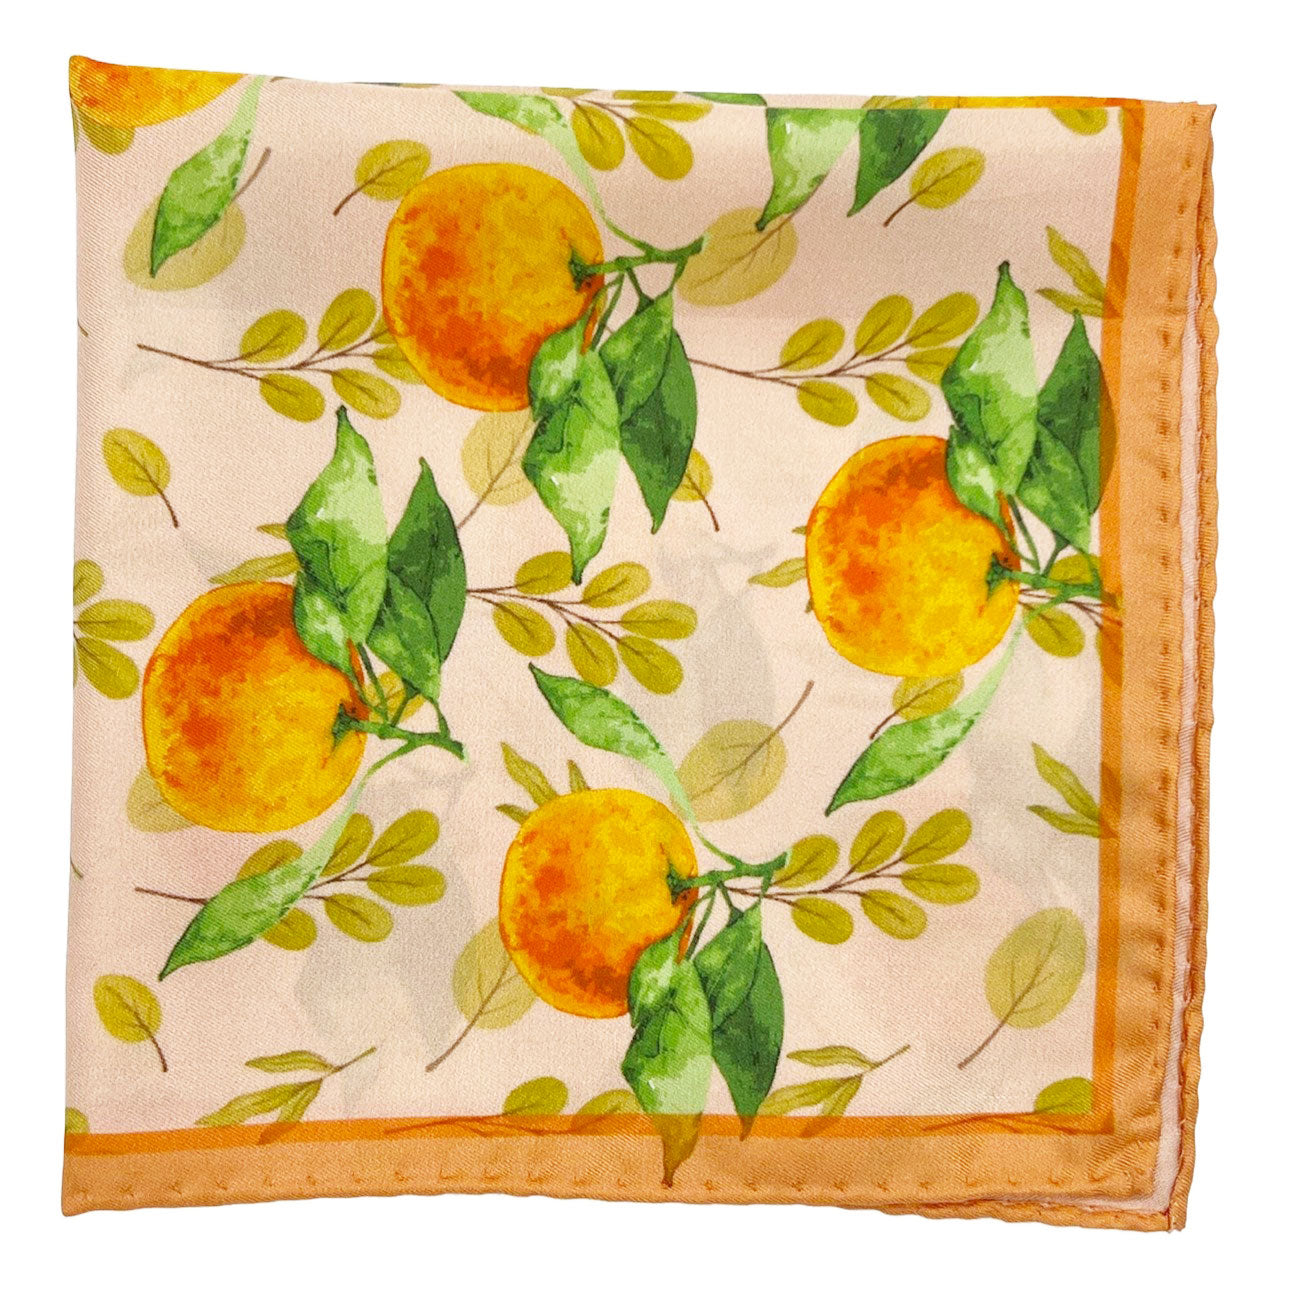 The 'Aire' silk pocket square from SOHO Scarves folded into a quarter, showing the orange motif, framed on two sides by a peach-coloured border.